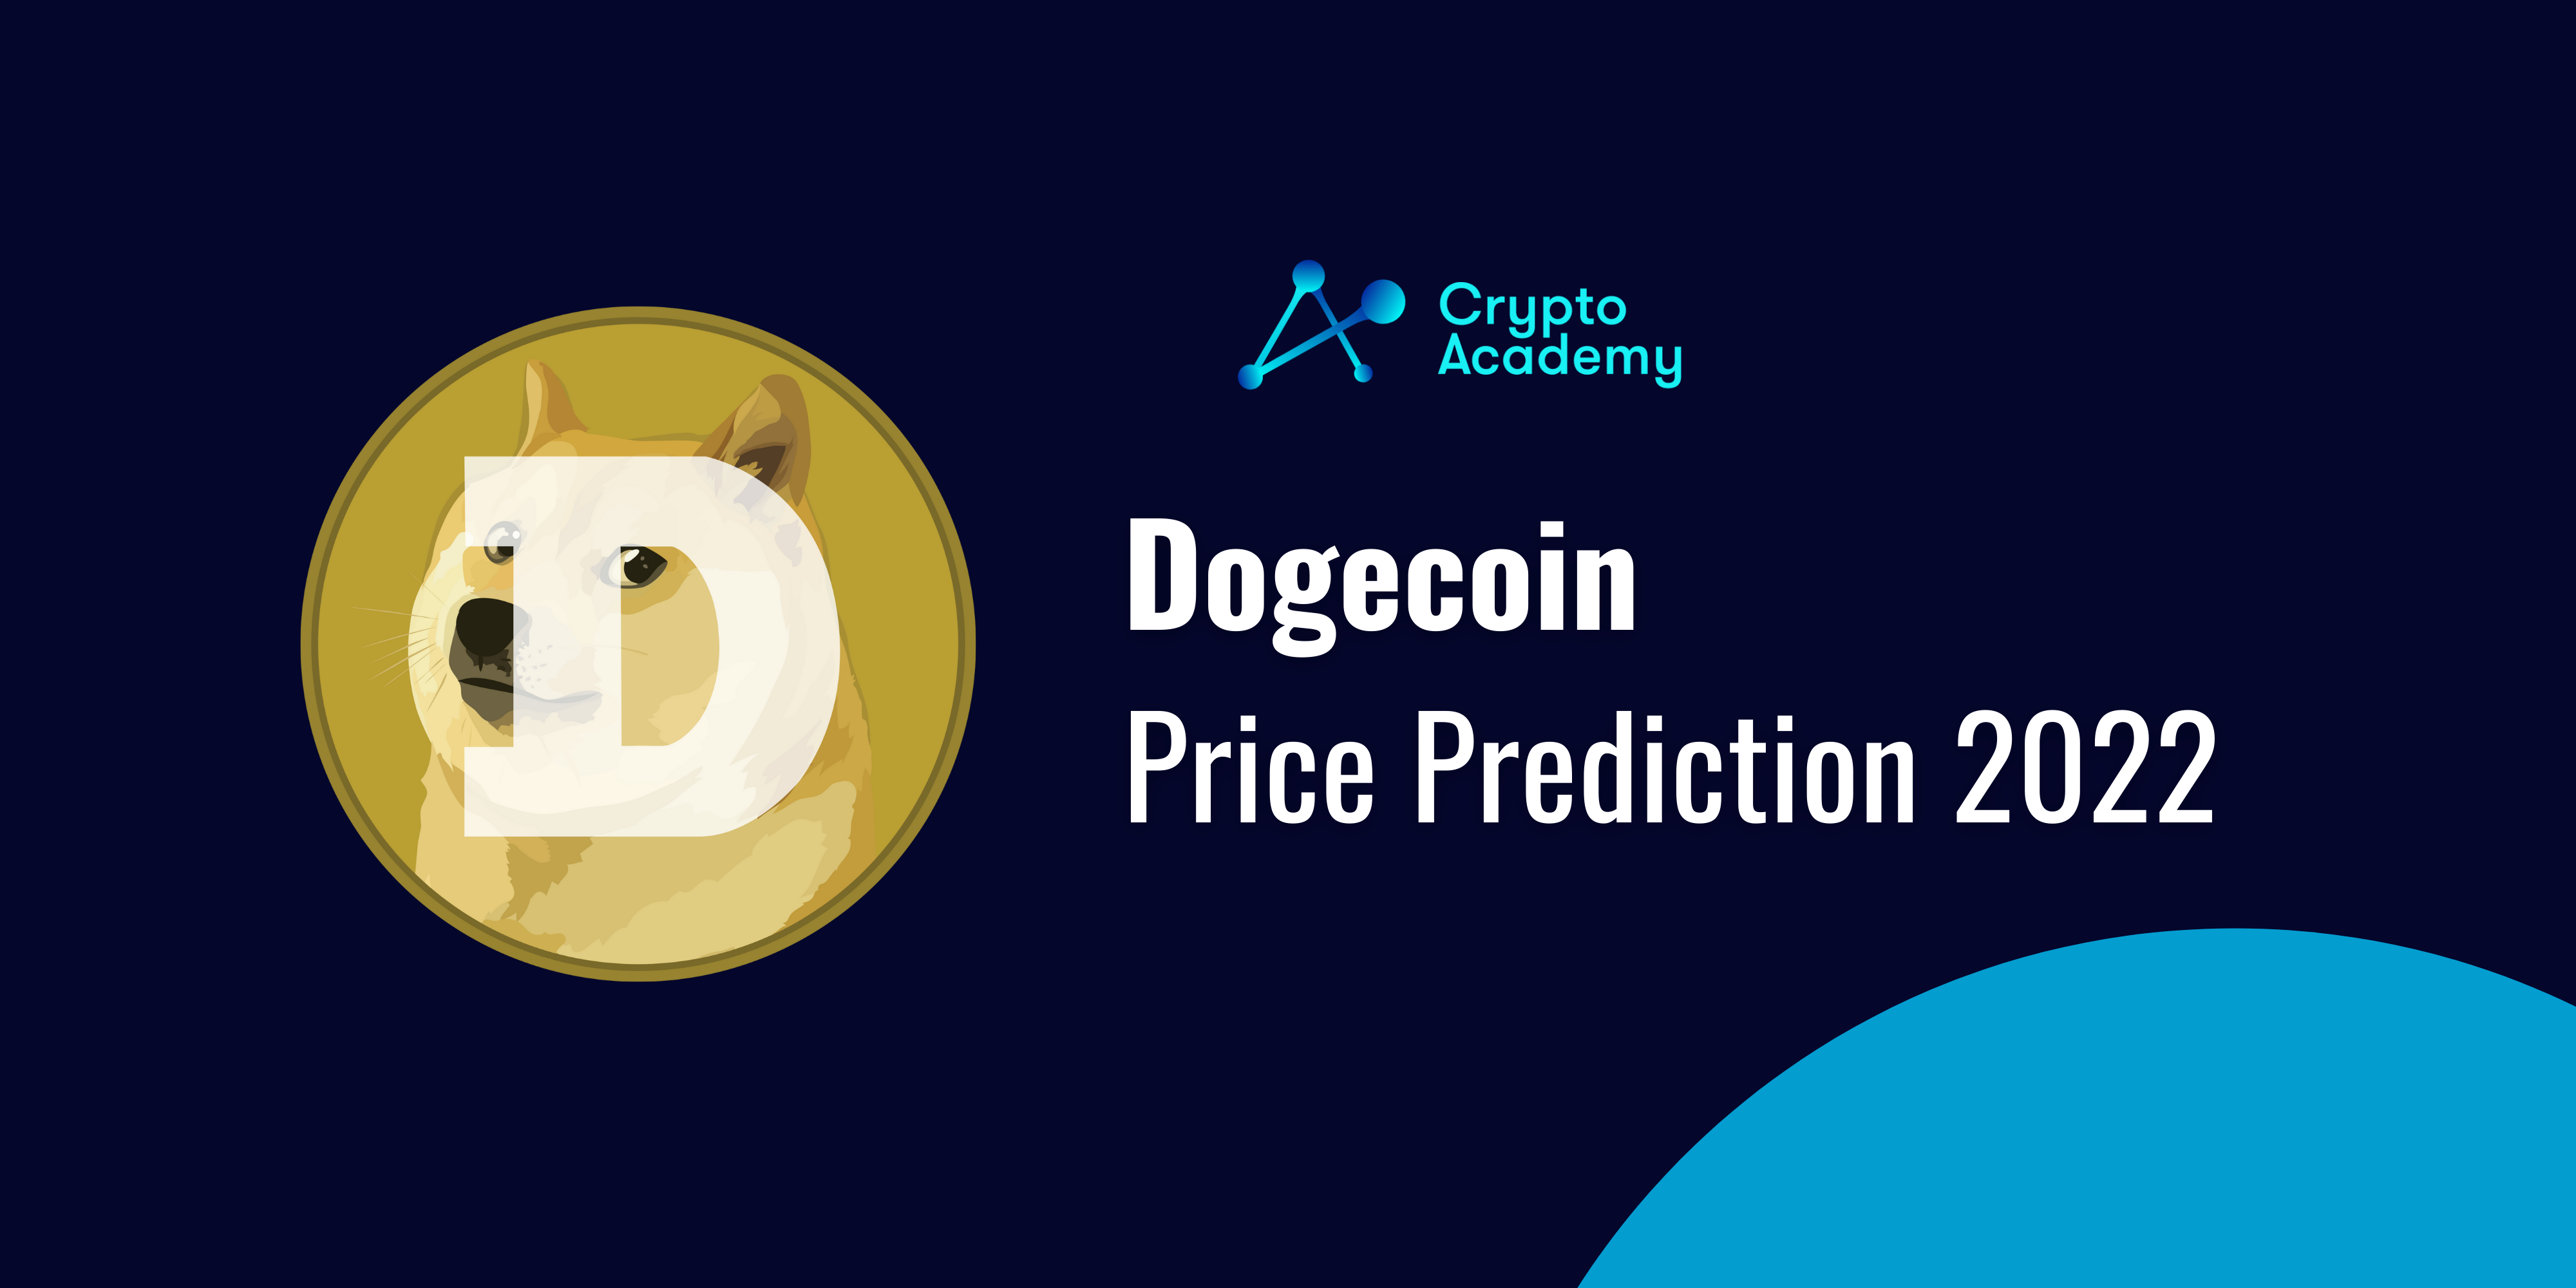 Dogecoin Price Prediction 2022 – What Will the Dogecoin Price be in 2022 and in Next Years to Come?